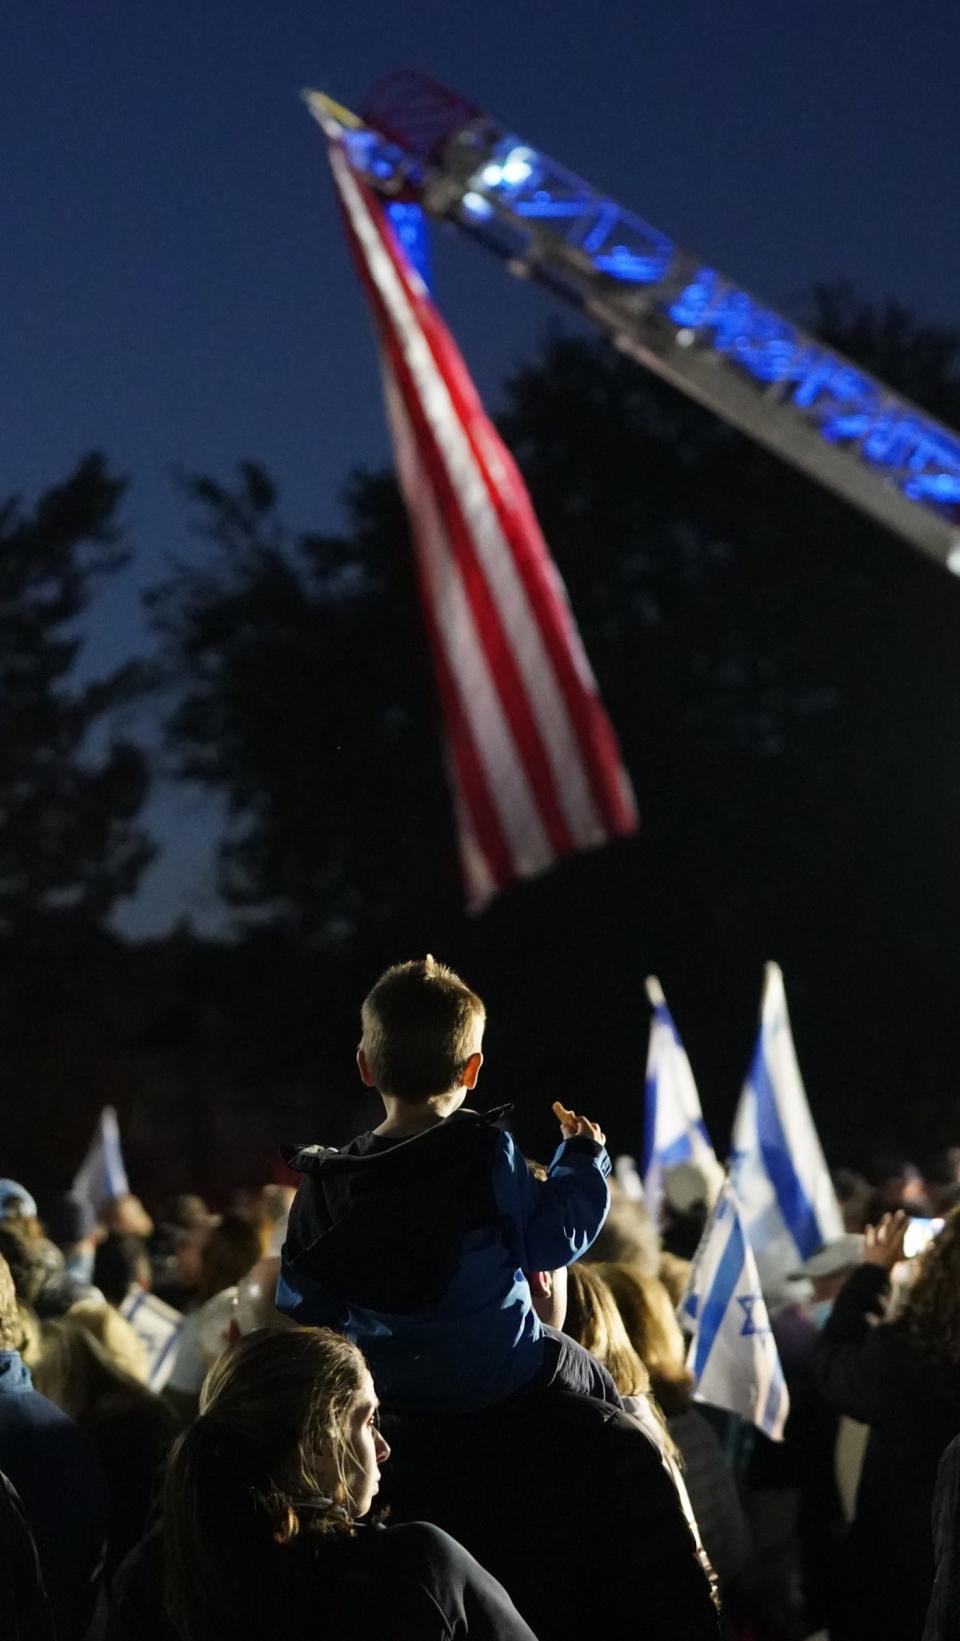 A child sids on a mans shoulder during a candlelight rally to show solidarity and support for the people of Israel at the Rockland County Courthouse in New City hosted by the Jewish Federation & Foundation of Rockland County and the Rockland County Jewish Community on Tuesday, October 10, 2023.